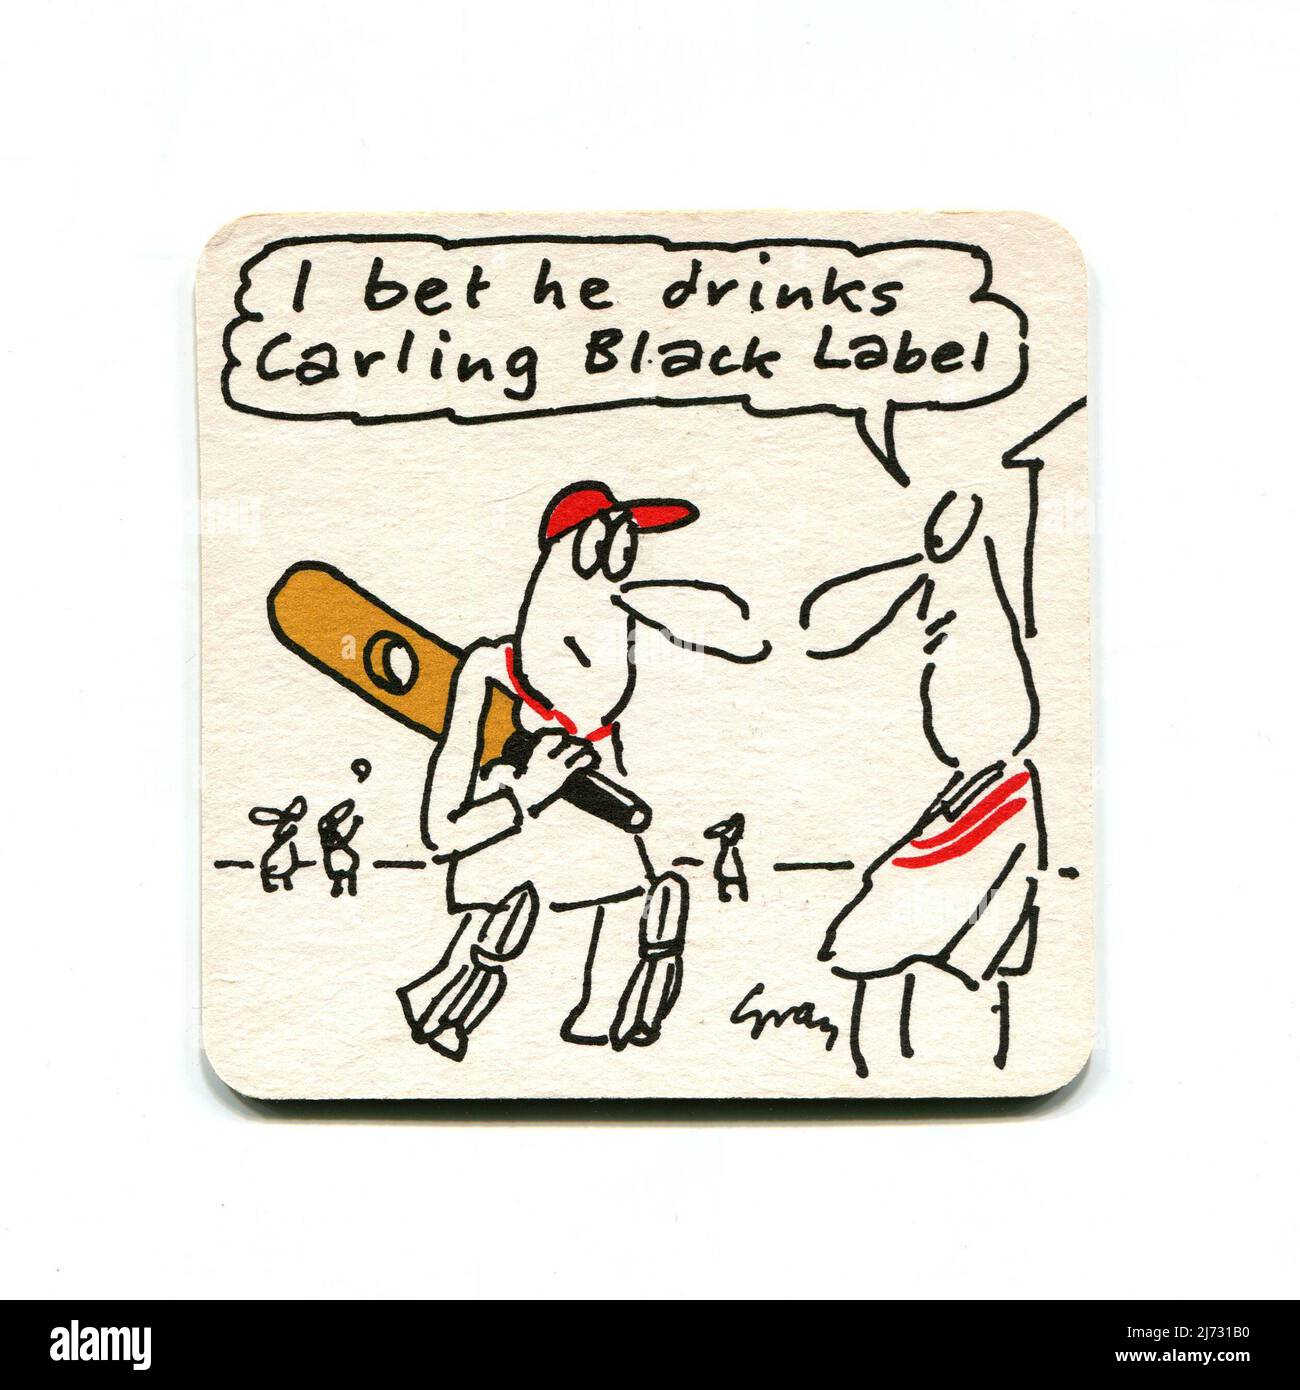 A vintage Carling Black Label beer mat produced as a promotional item for the popular “I bet he drinks Carling Black Label” 1980s advertising campaign. The mat is decorated with a comical image featuring a cricketer returning to the pavilion with a hole in his cricket bat, made by the ball. Stock Photo